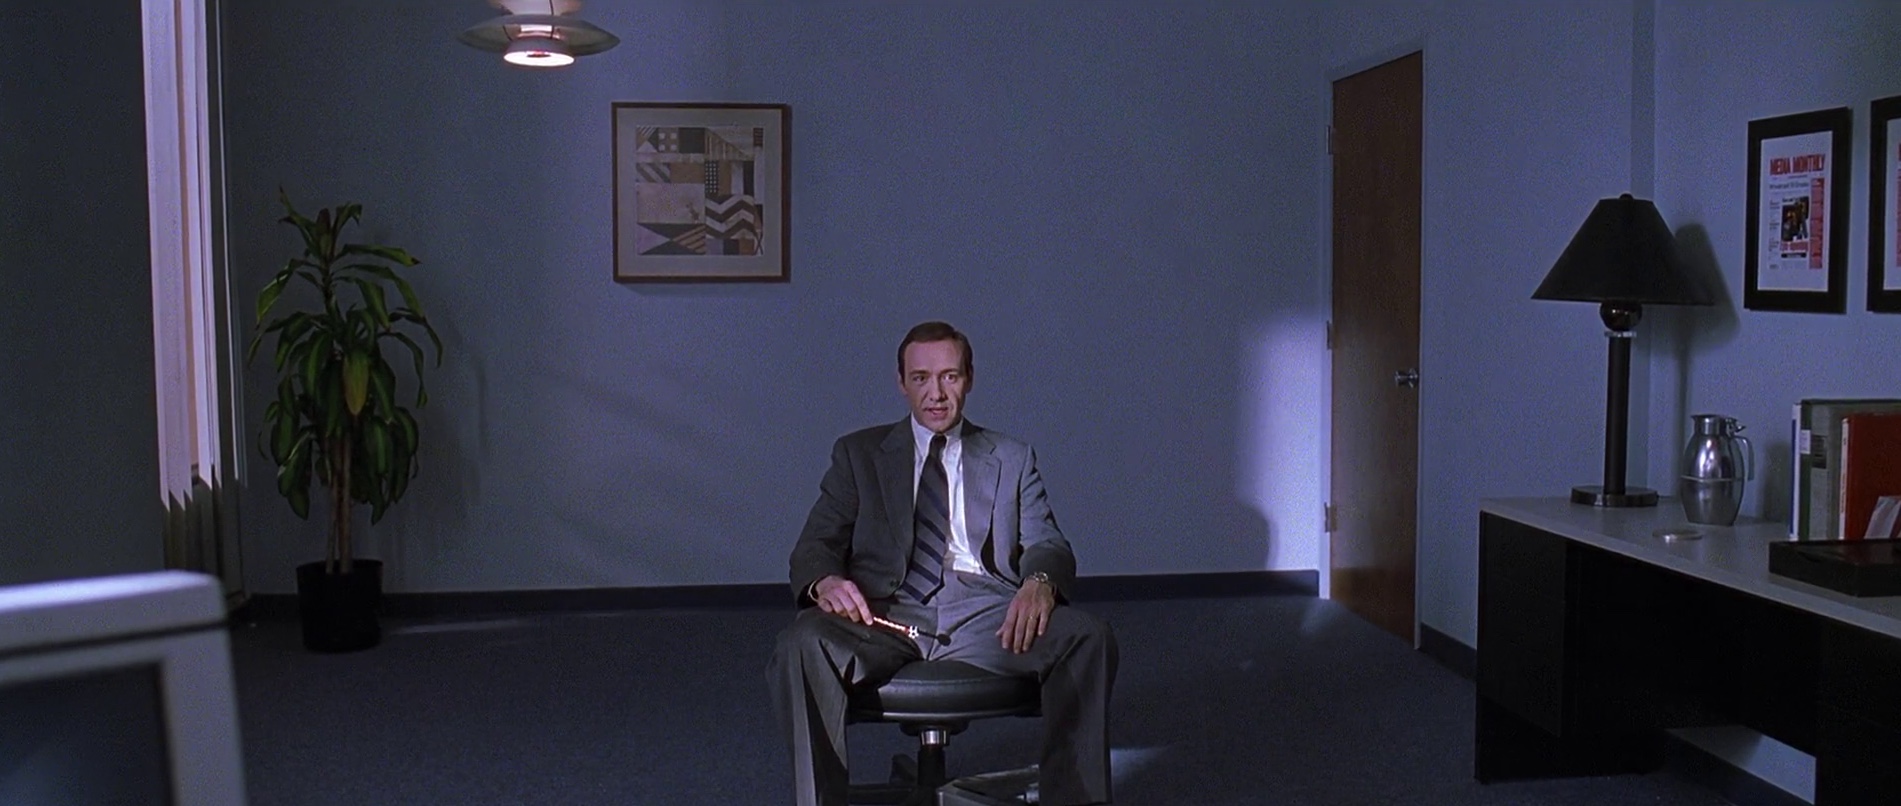 American Beauty (1999) by Sam Mendes